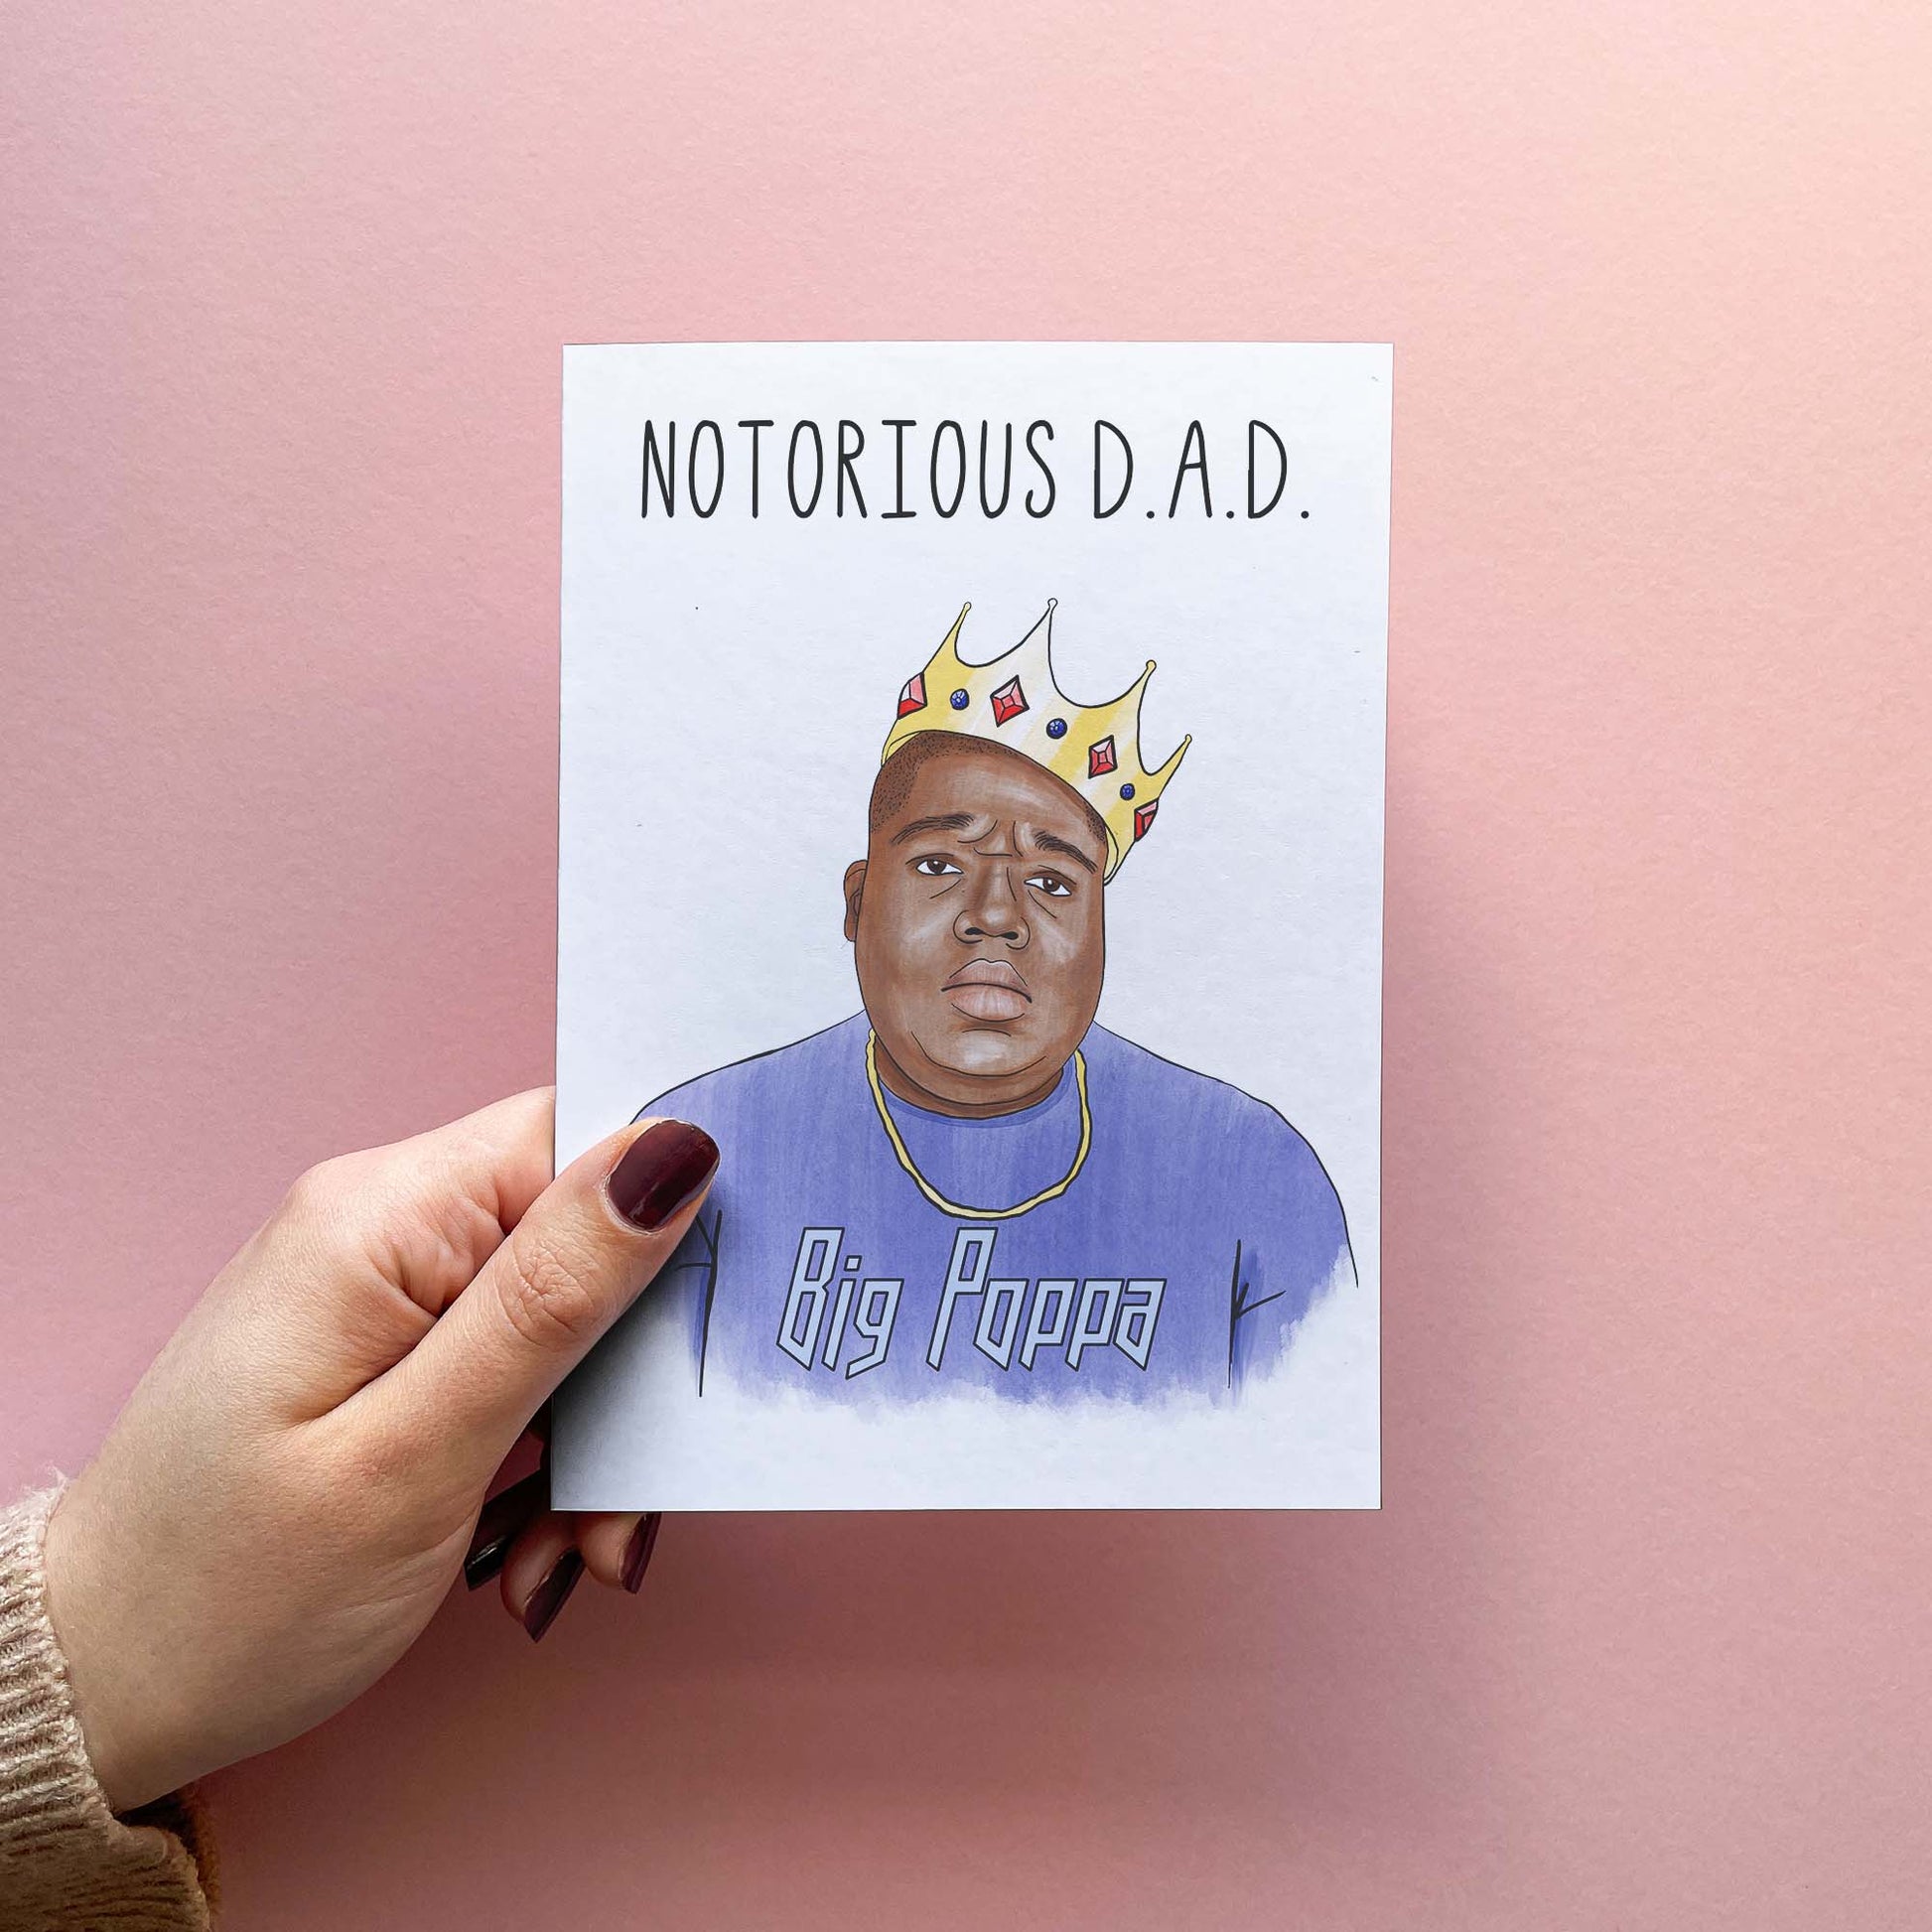 Funny Father's Day Card reading 'Notorious D.A.D' for 90s music fan. Father jokes aside, this card can also be used as the perfect happy birthday greeting card for your father to pair with unique Father's Day gifts! Card held in hand for size reference.